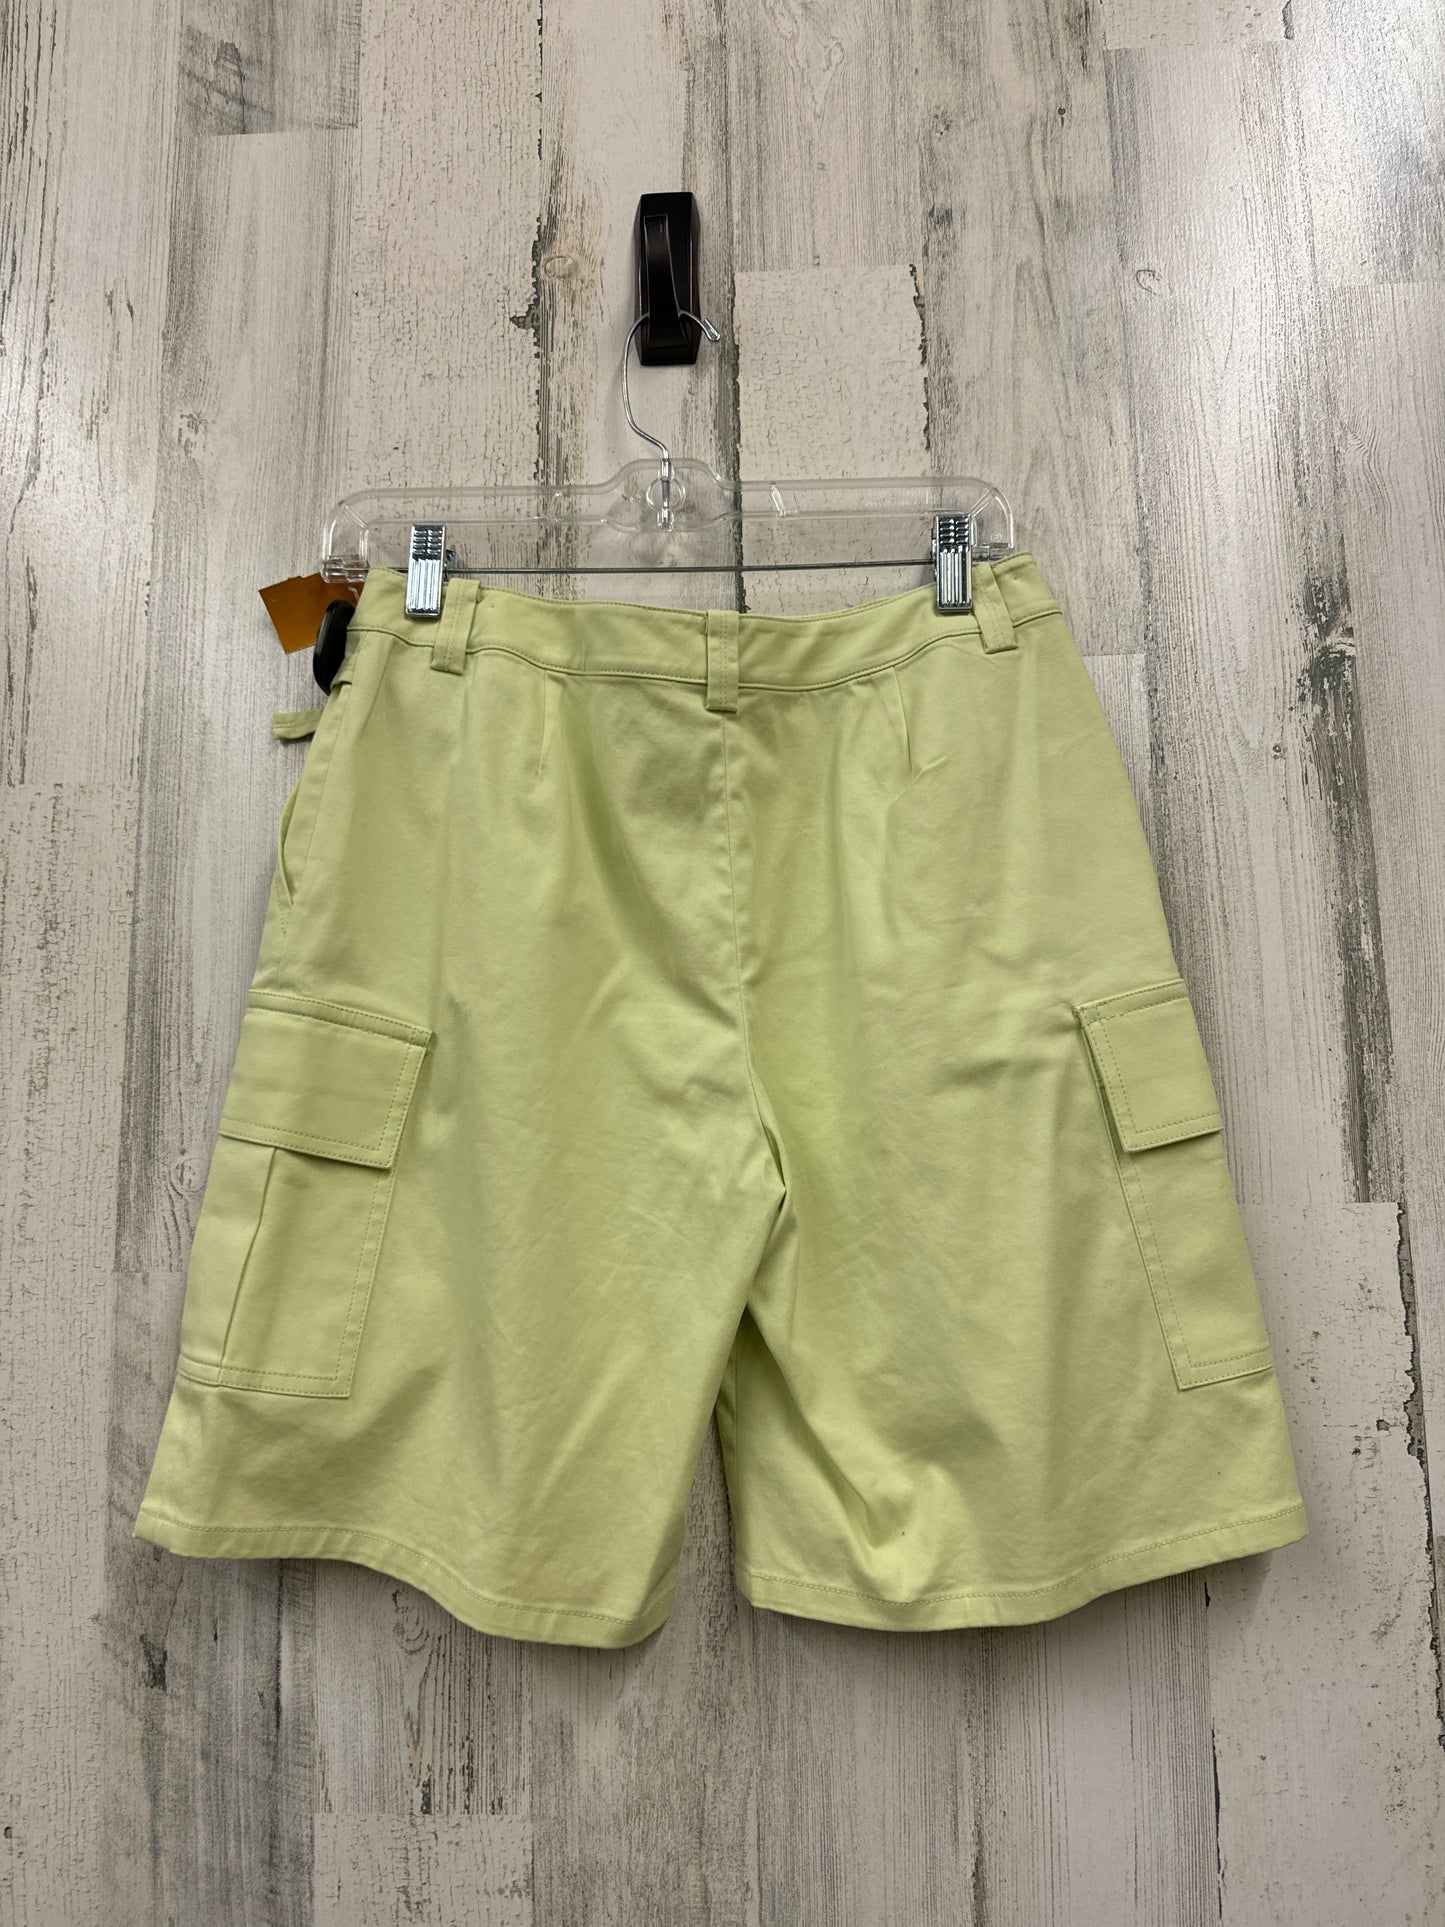 Shorts By St John Collection  Size: 6